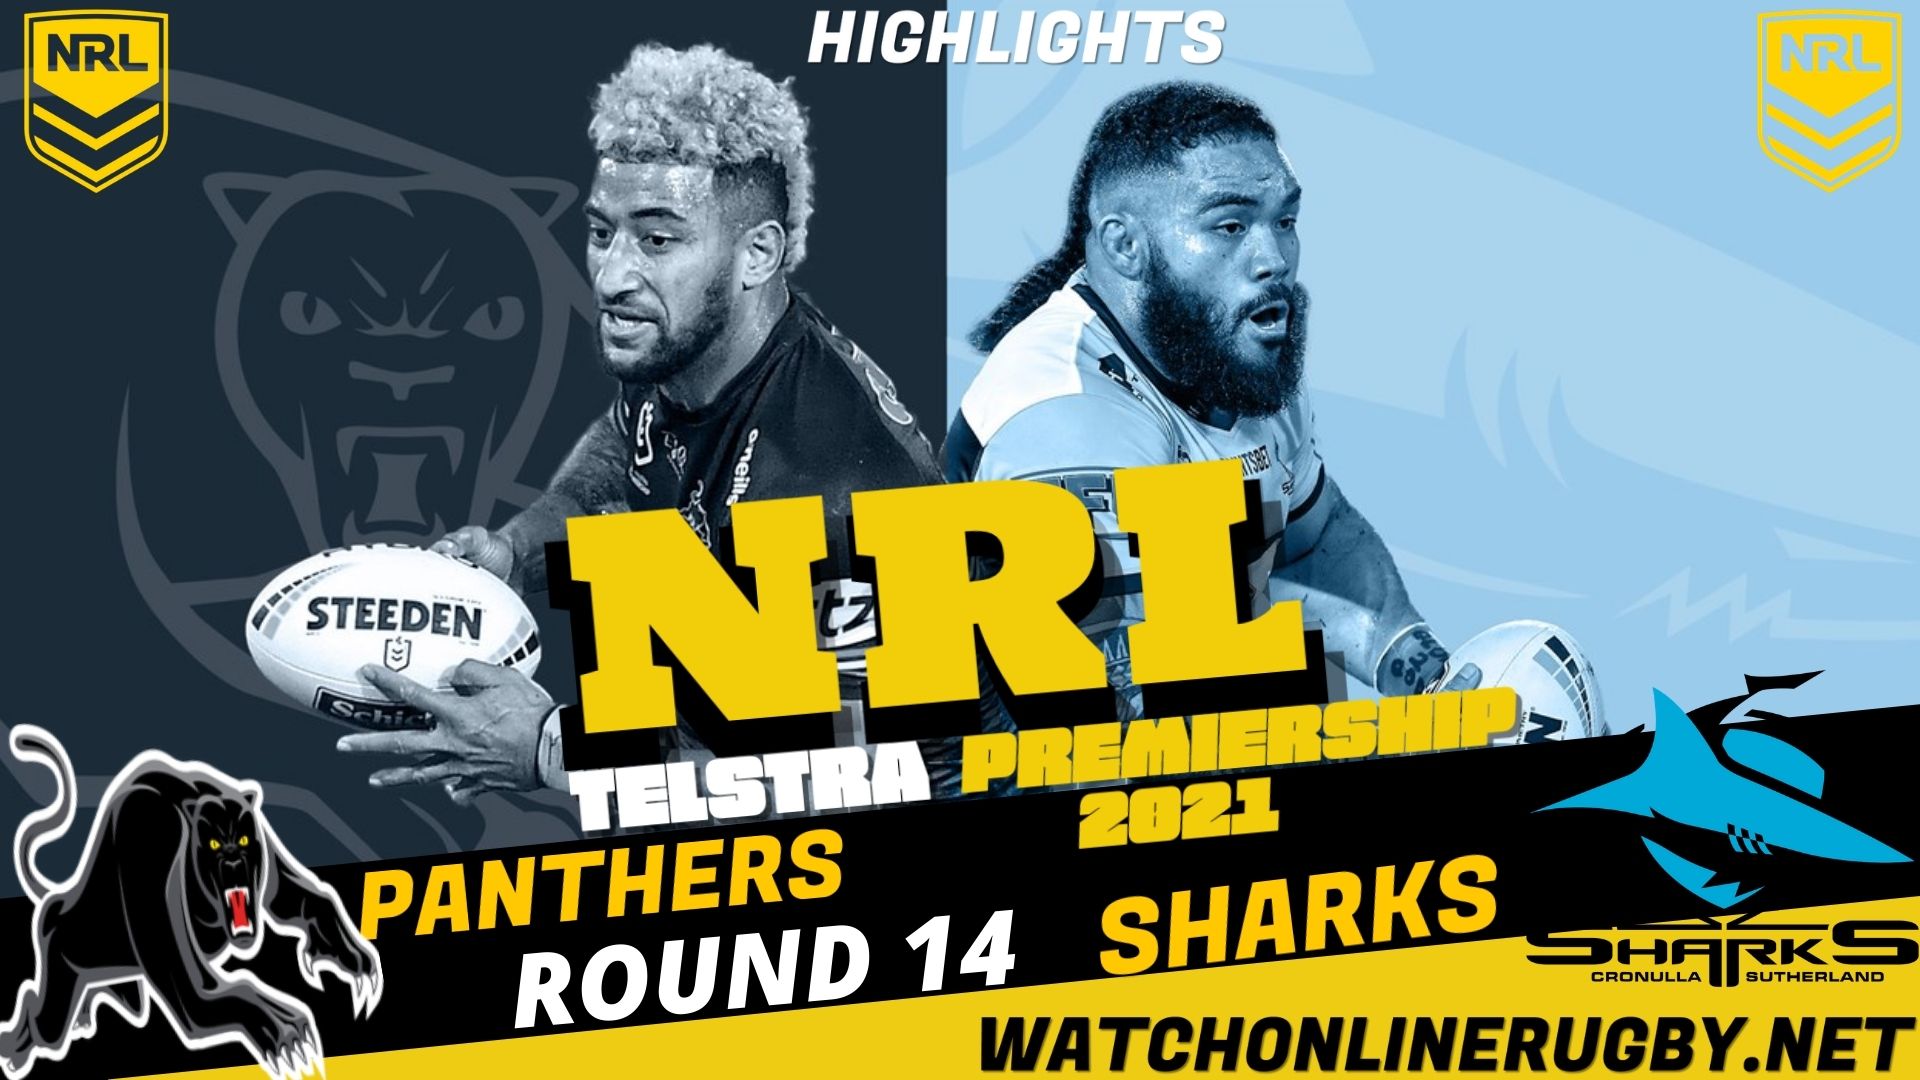 Sharks Vs Panthers Highlights RD 14 NRL Rugby